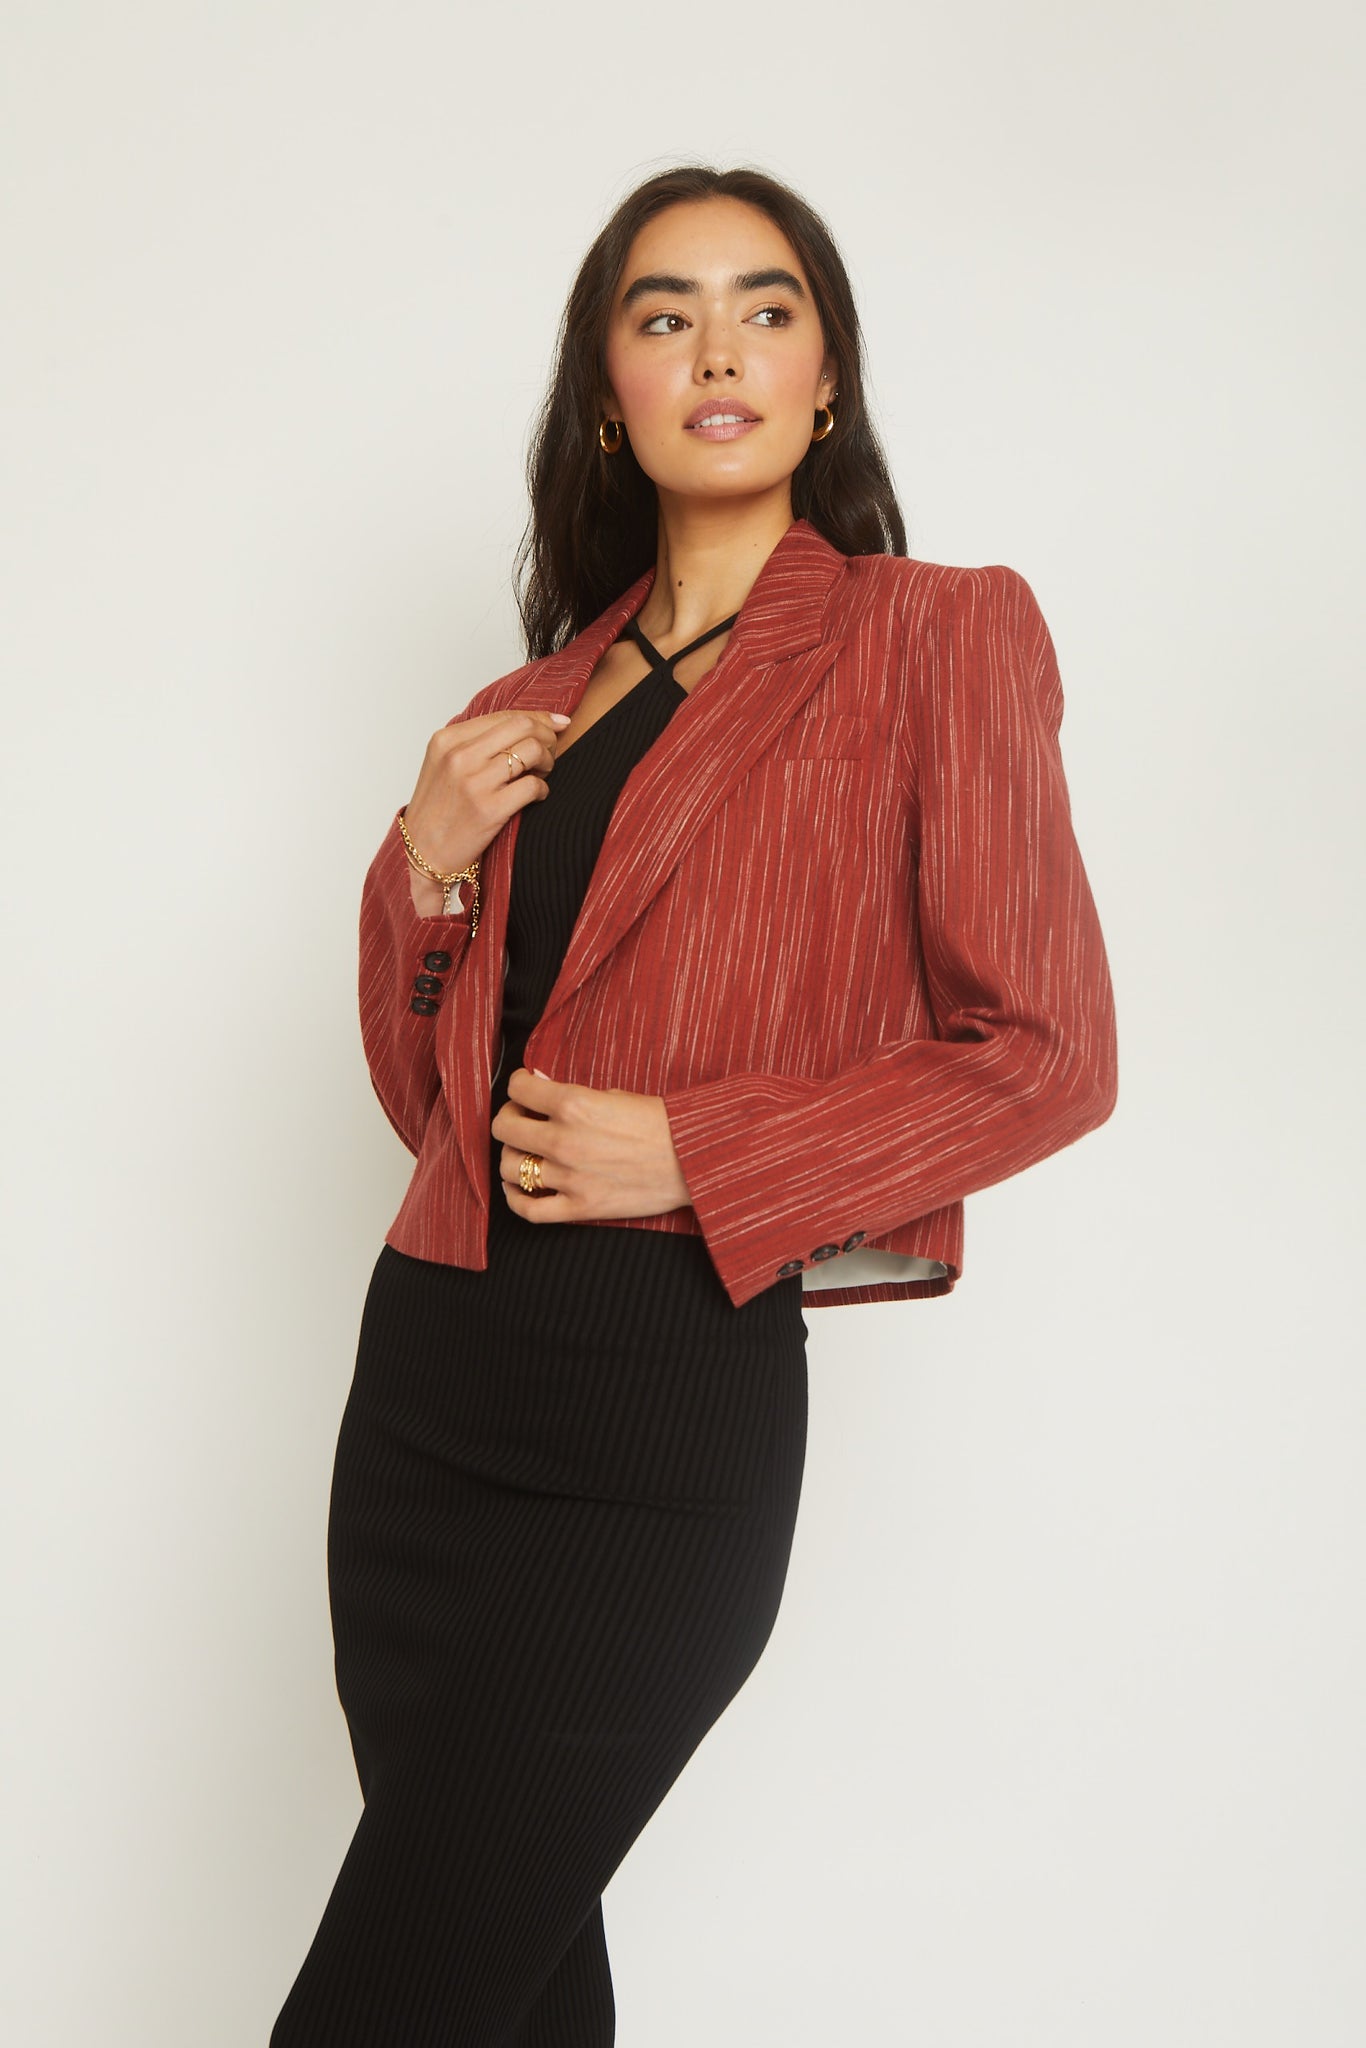 Cropped Dried Rose Red Blazer Jacket Lapel Collar Spring Summer Style Bright Red Sexy Cropped Jacket Womens Style Workwear Office Wear Elevated Outerwear Sophisticated Chic